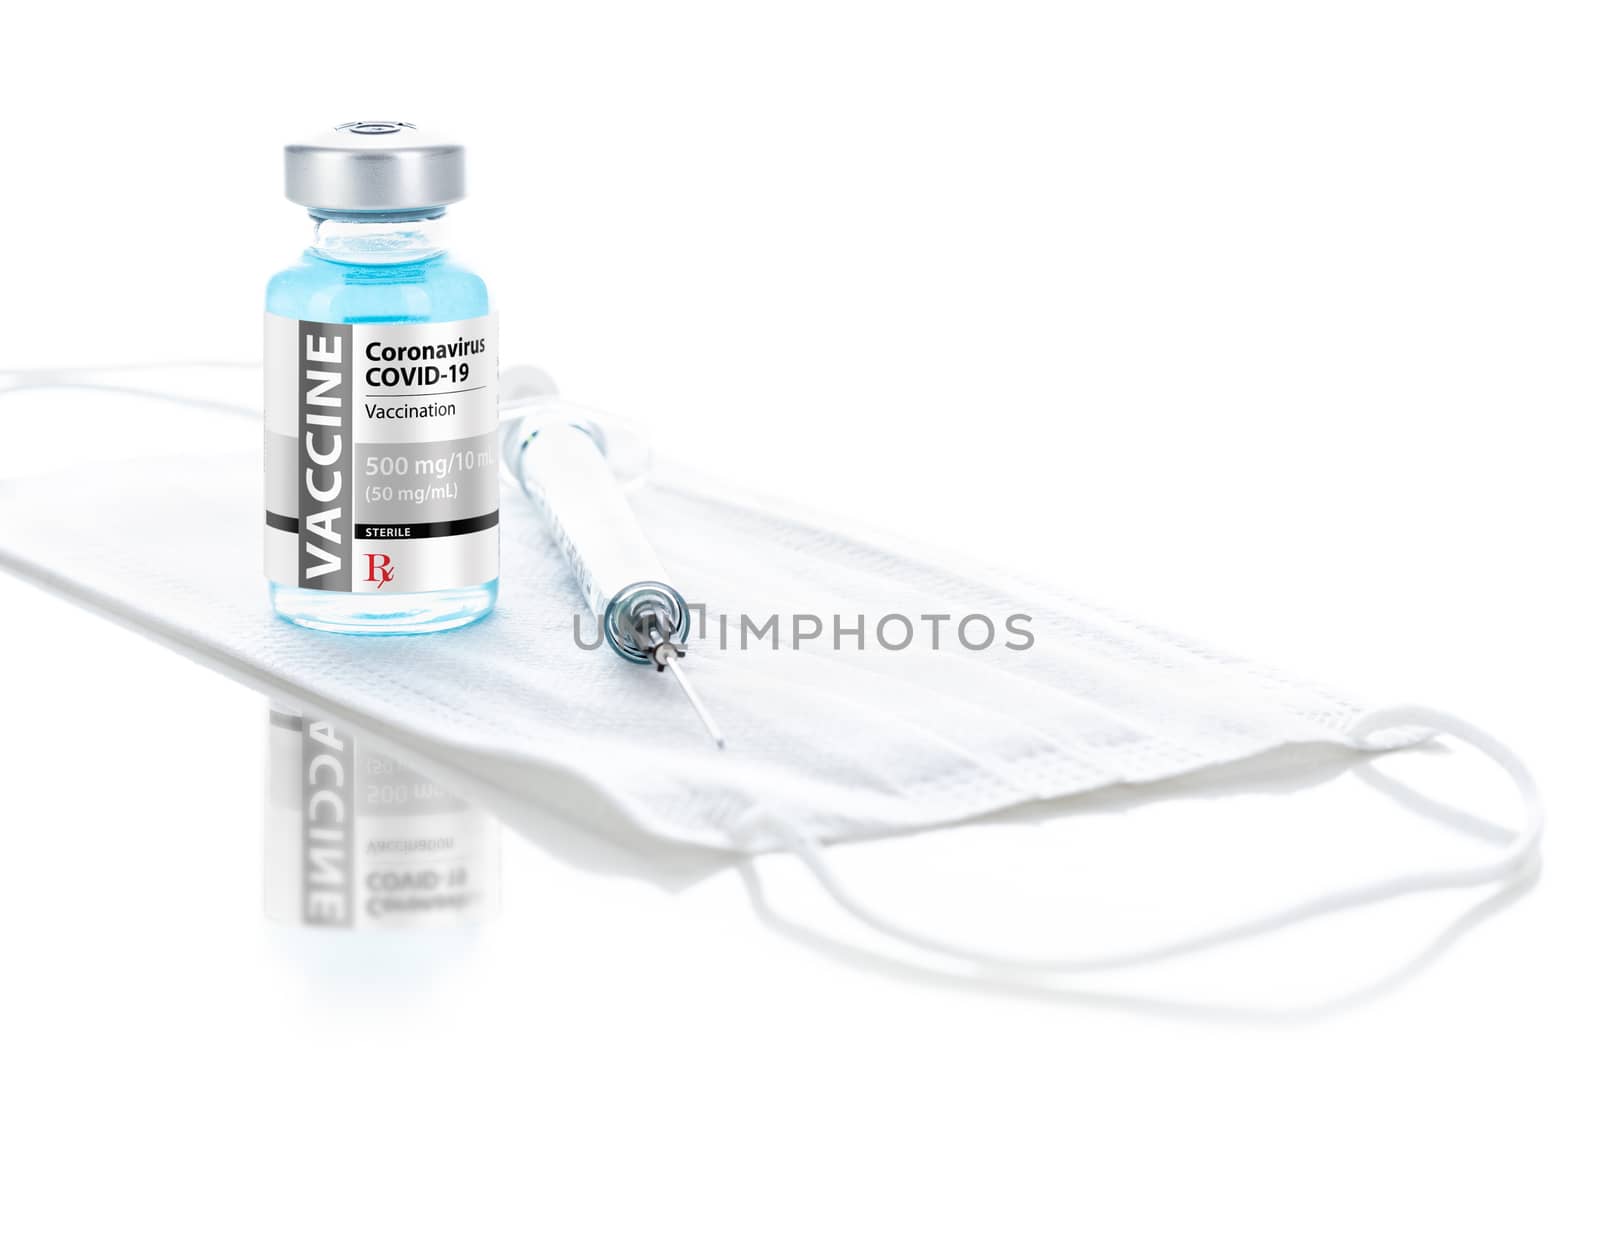 Coronavirus COVID-19 Vaccine Vial, Syringe and Medical Face Mask by Feverpitched